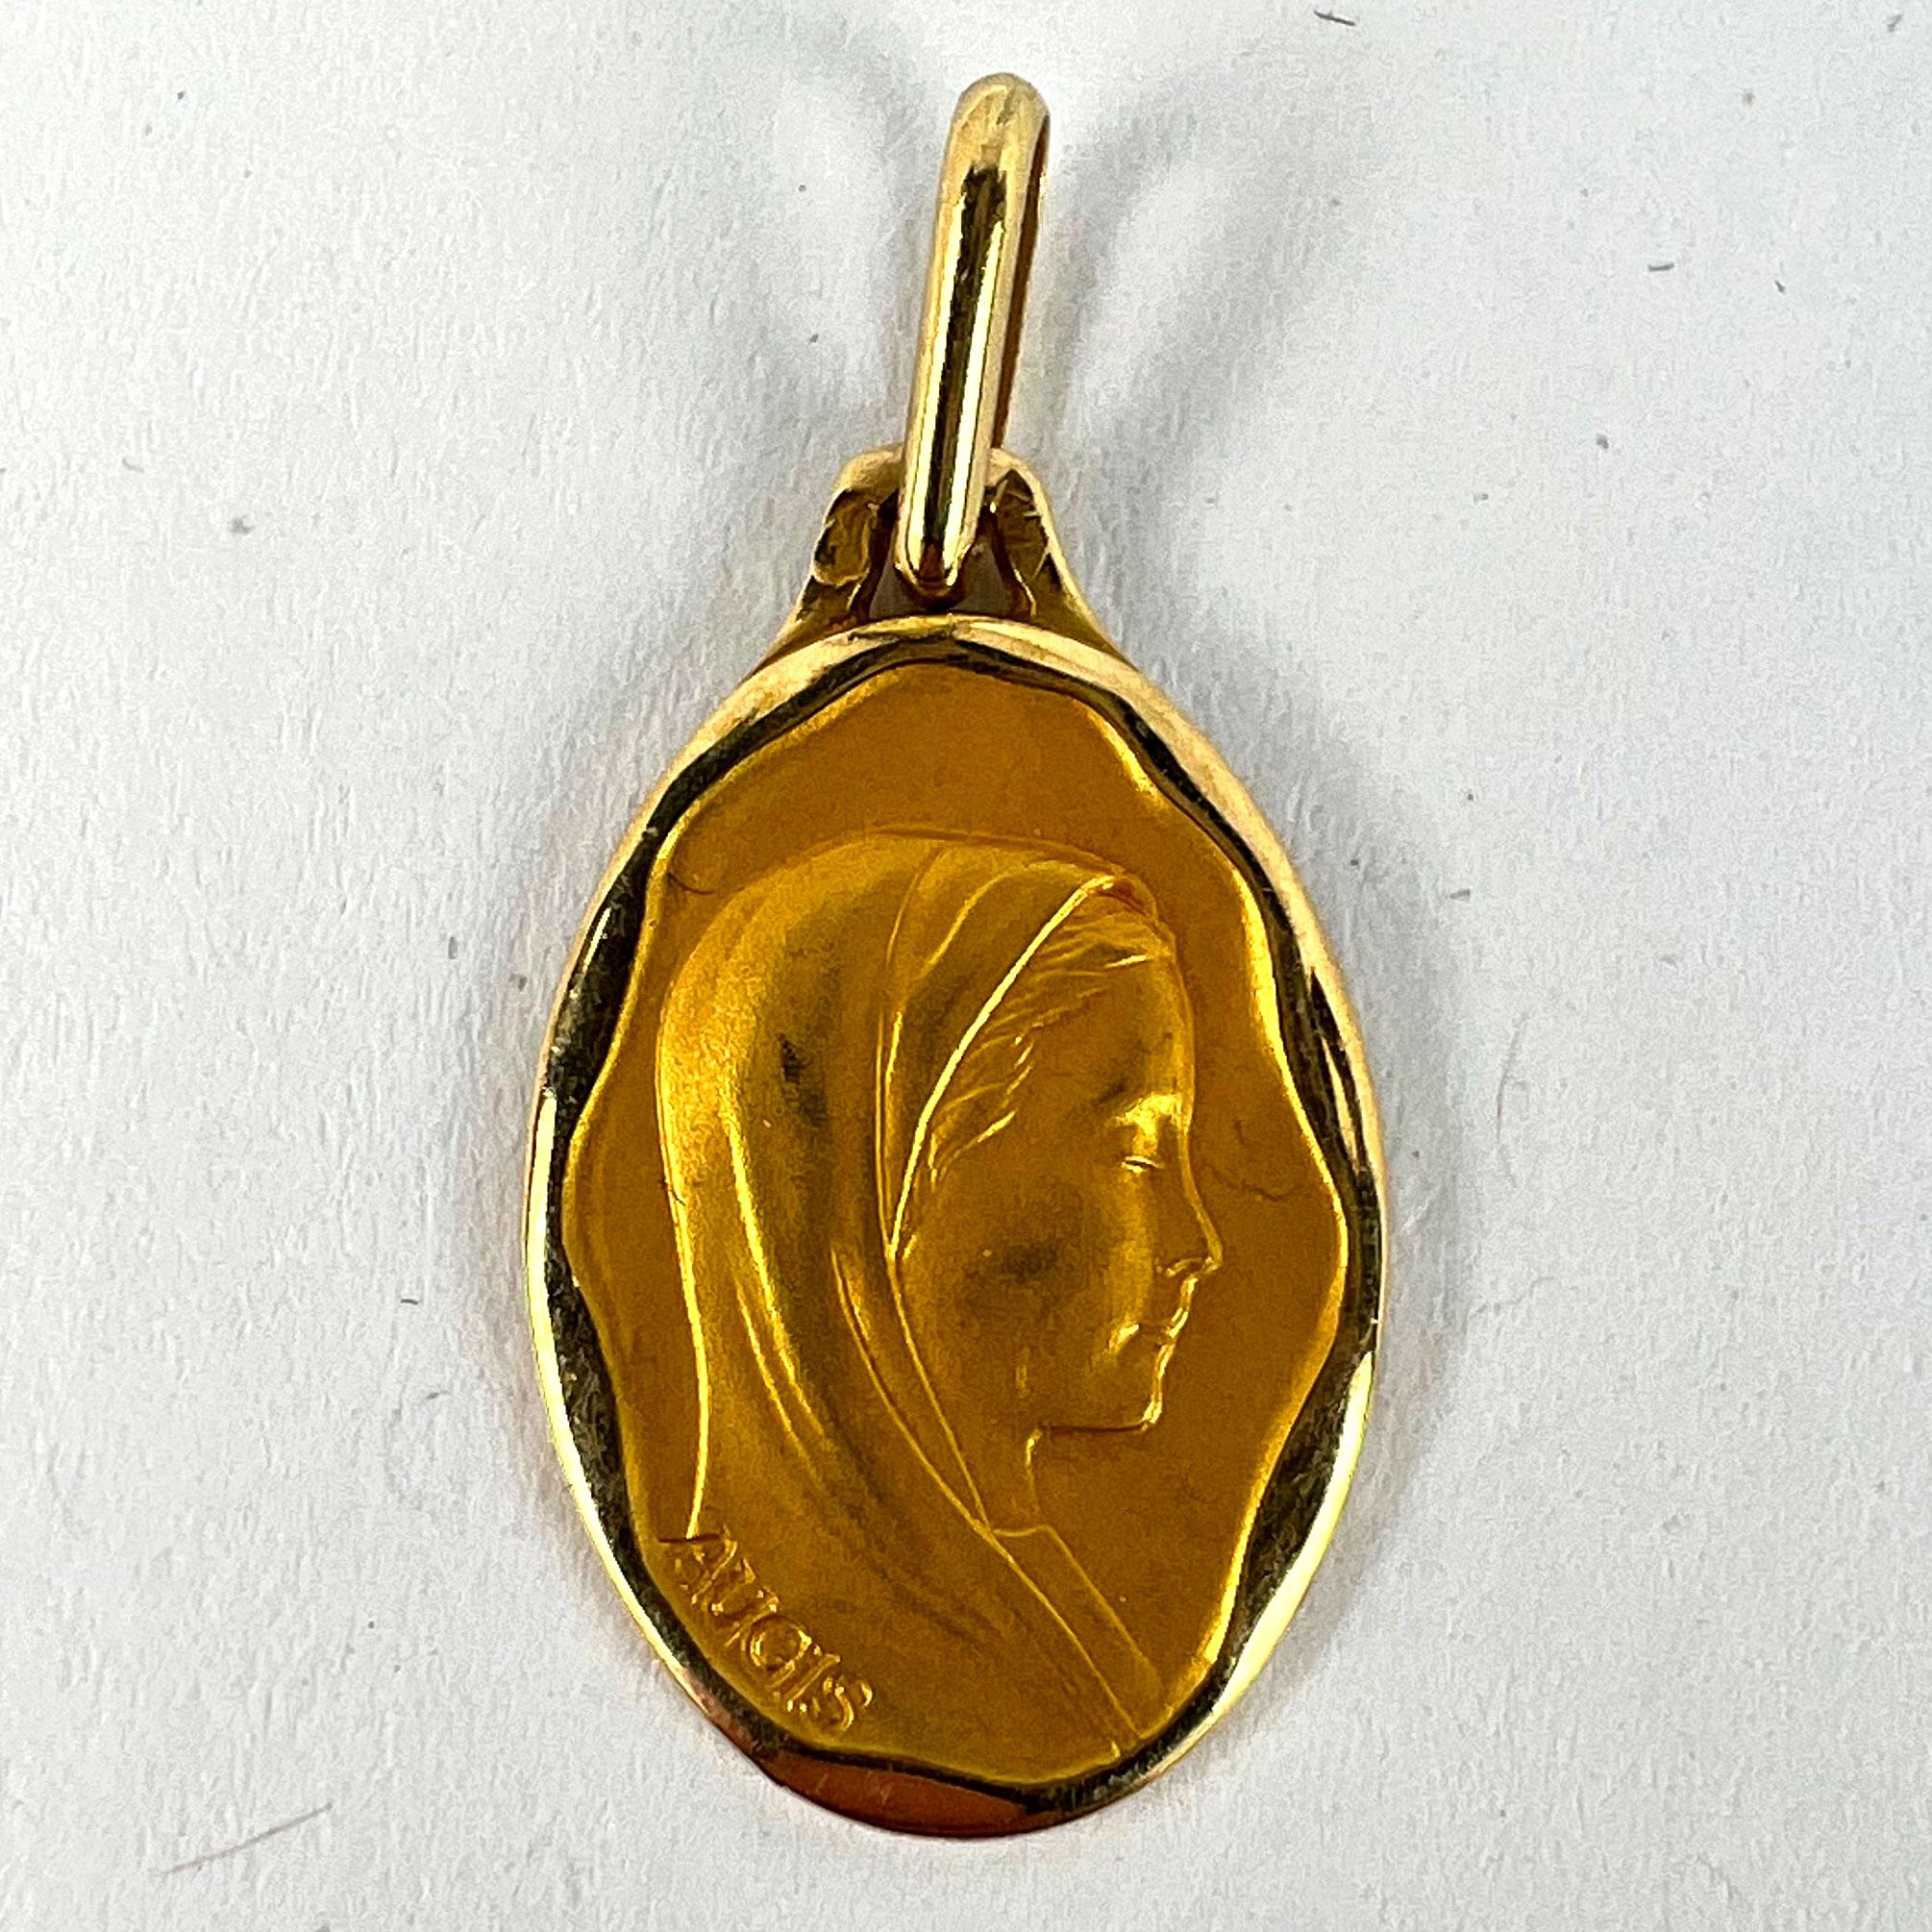 French Augis Virgin Mary 18K Yellow Gold Religious Medal Pendant For Sale 7